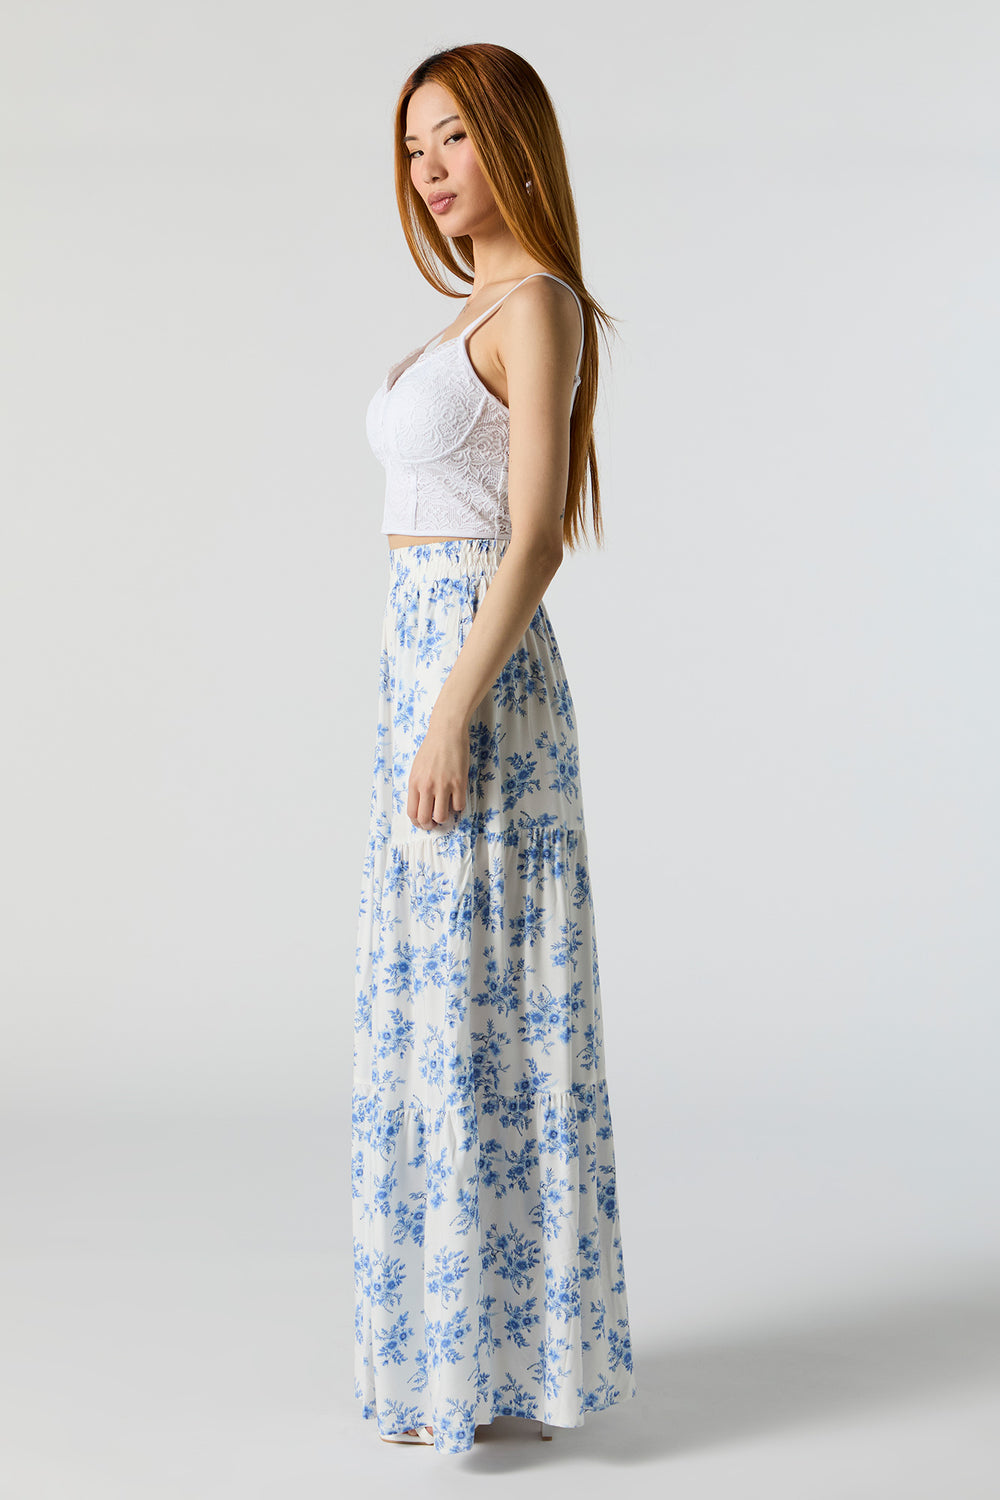 White Floral High Rise Tiered Maxi Skirt White Floral High Rise Tiered Maxi Skirt 3